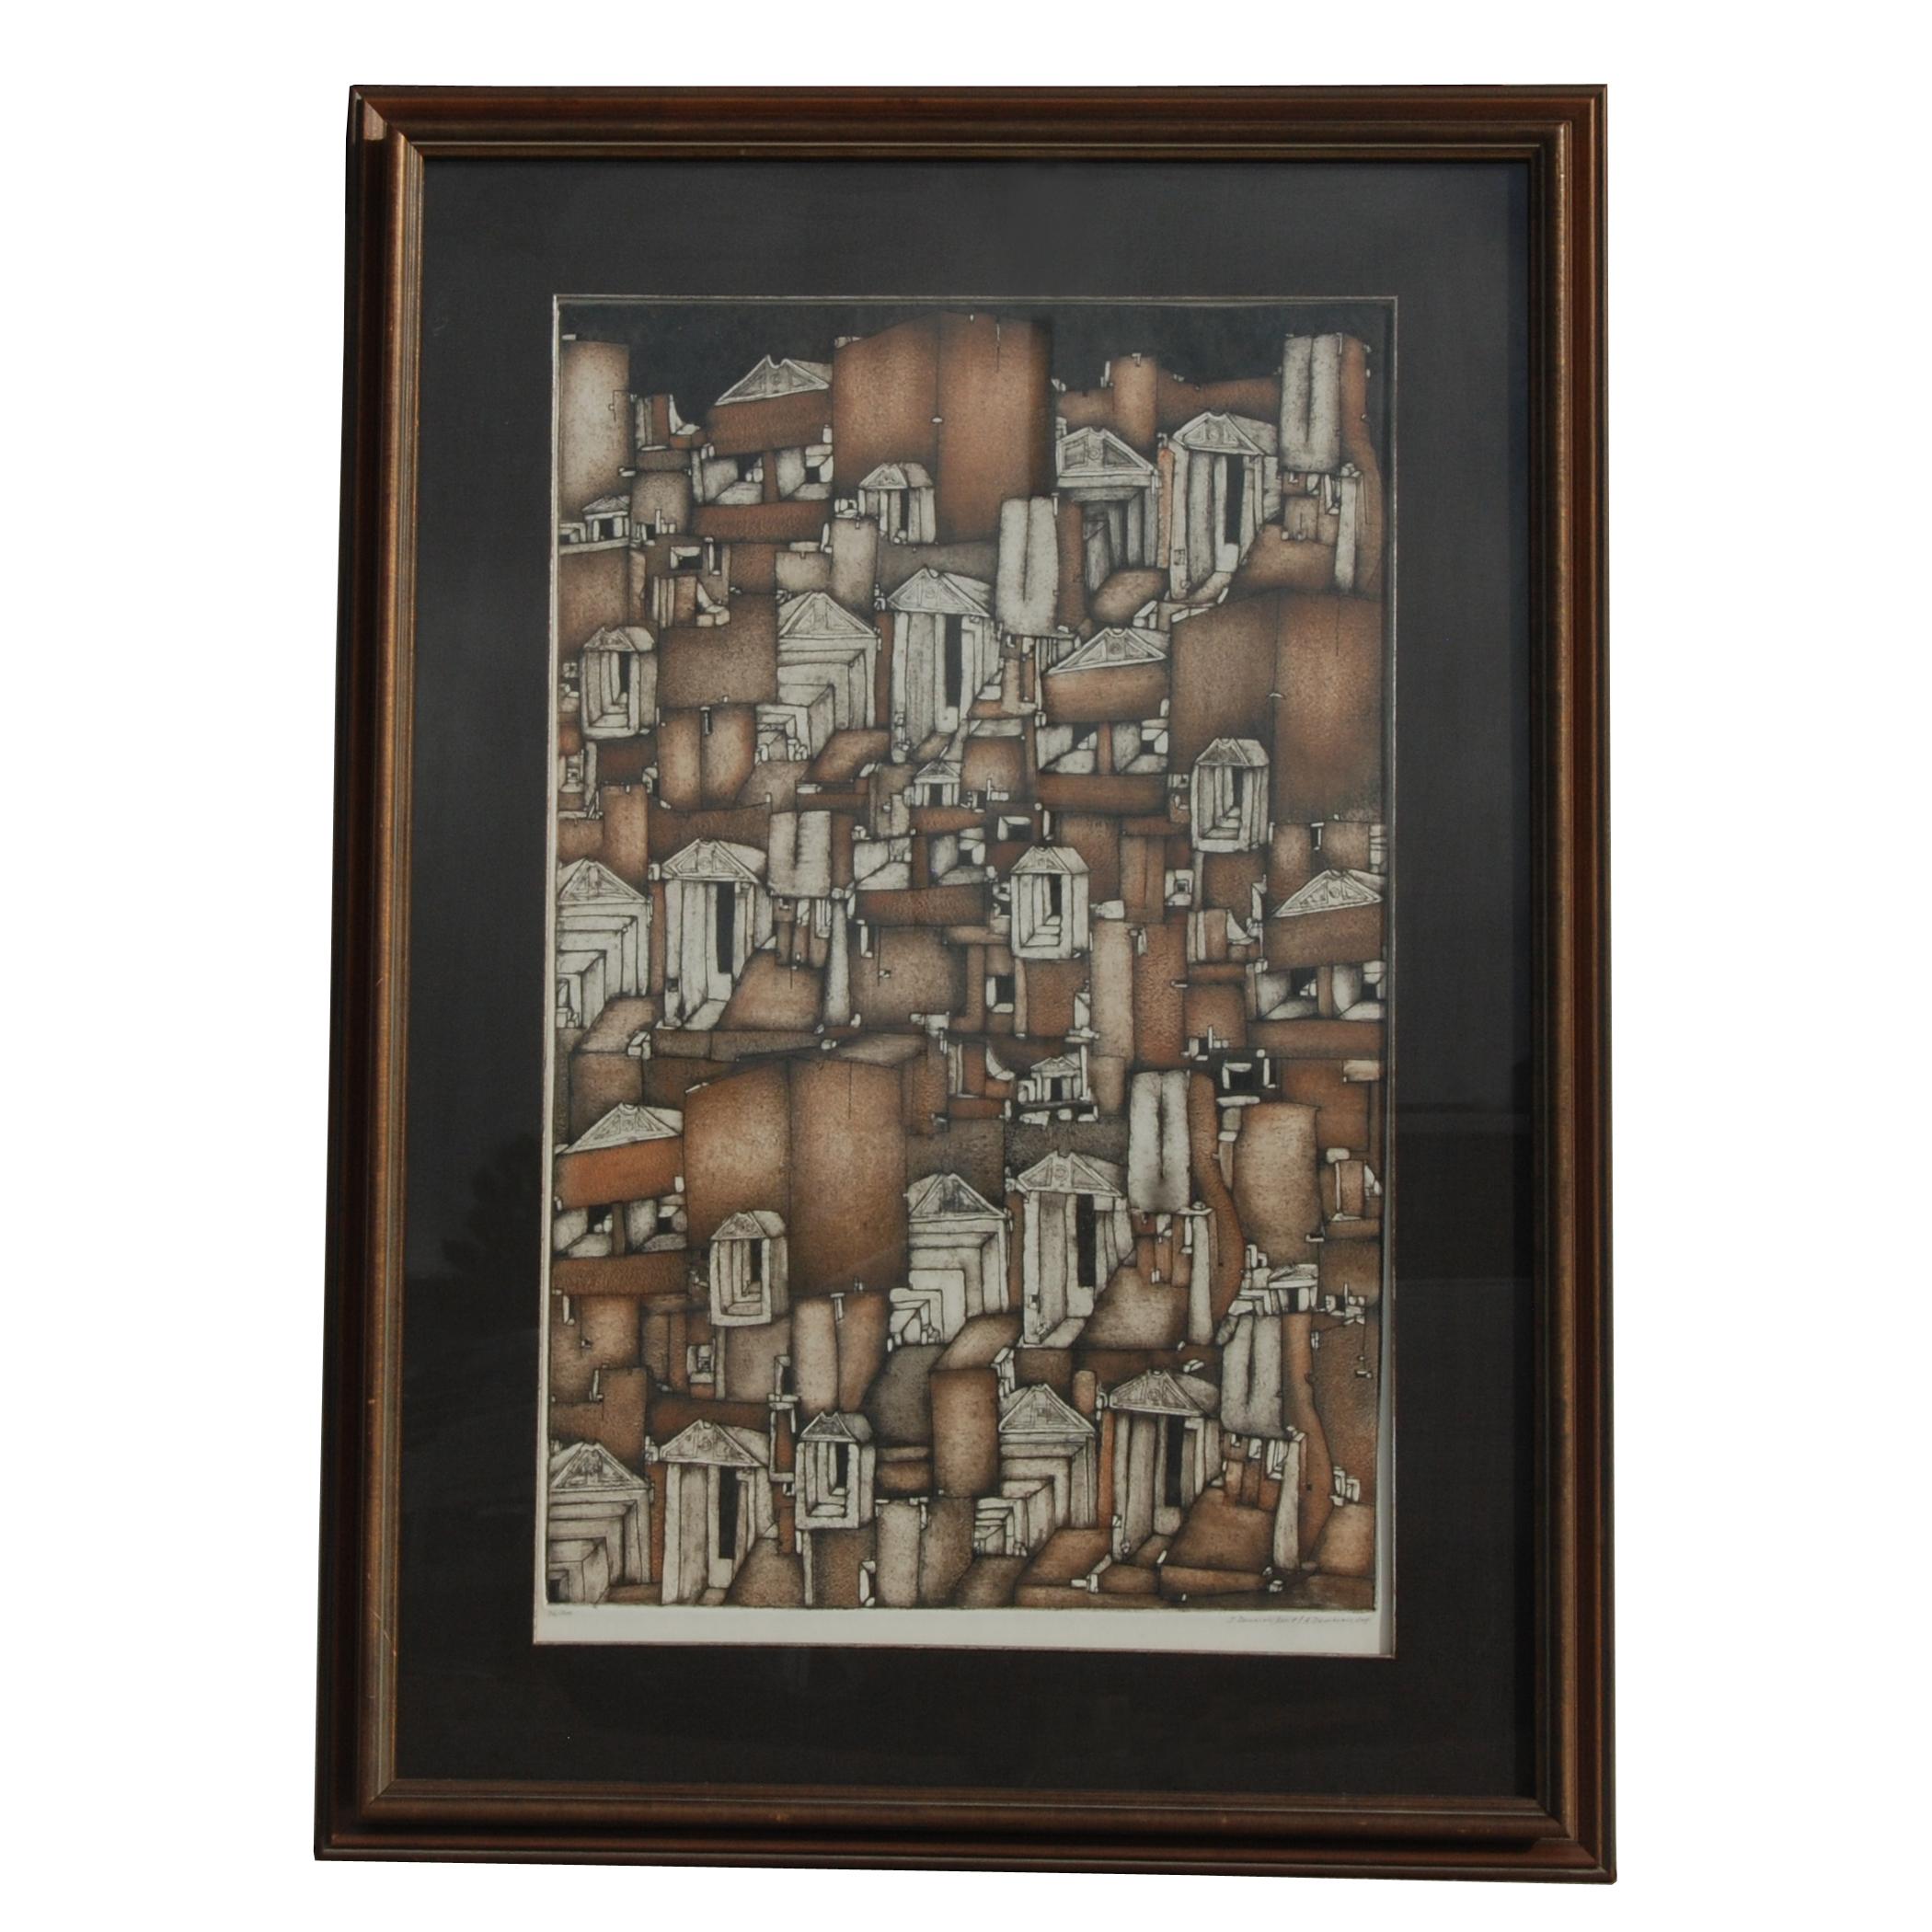 Limited edition Fecit Etching, numbered 36/200.

Artwork is framed, and depicts a village in neutral tones.


Art dimensions (Without frame): 20